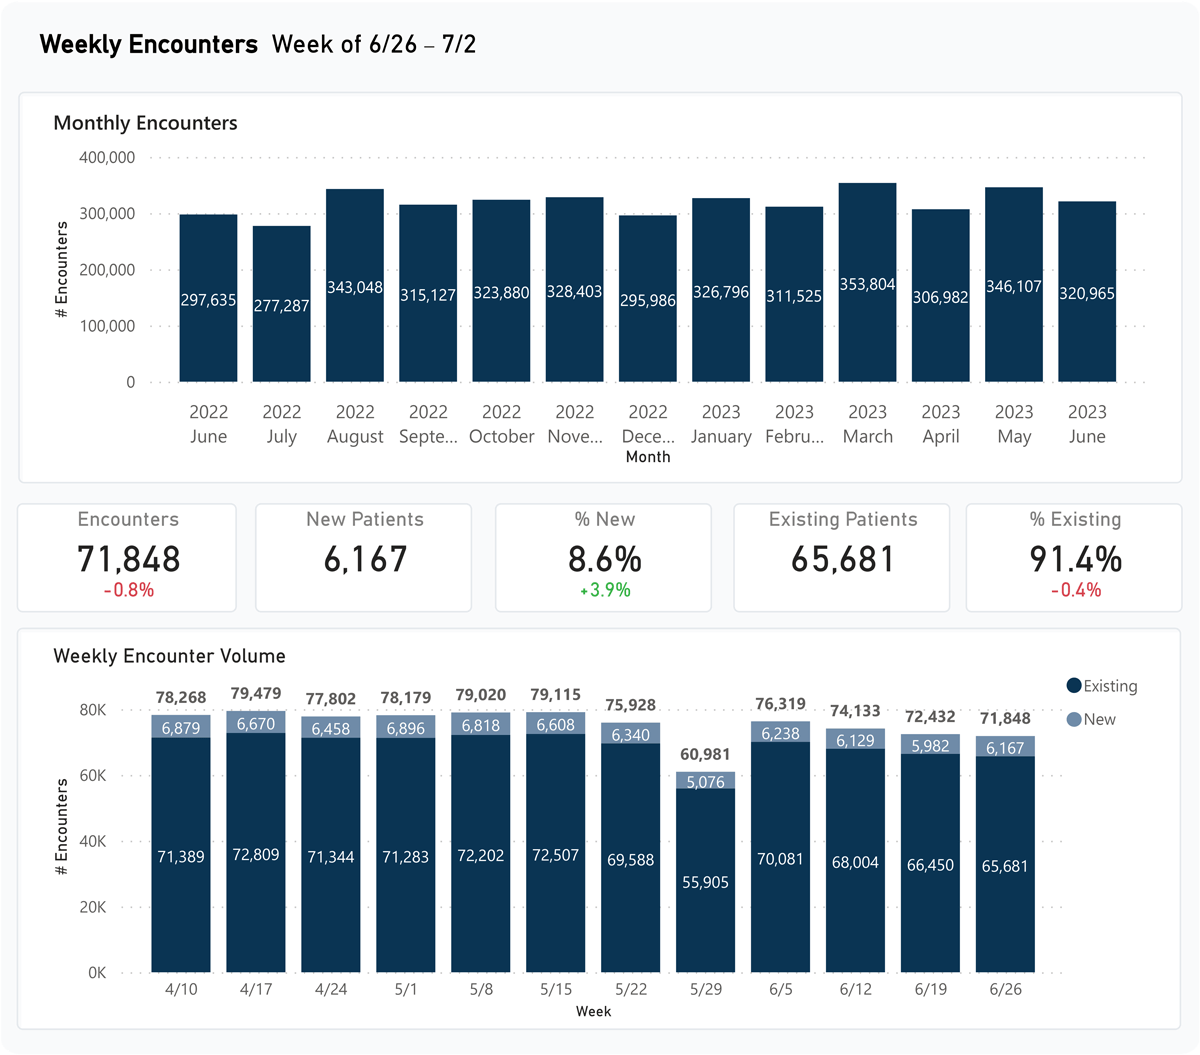 Weekly Encounter report showing 1 year of monthly encounter data and volume